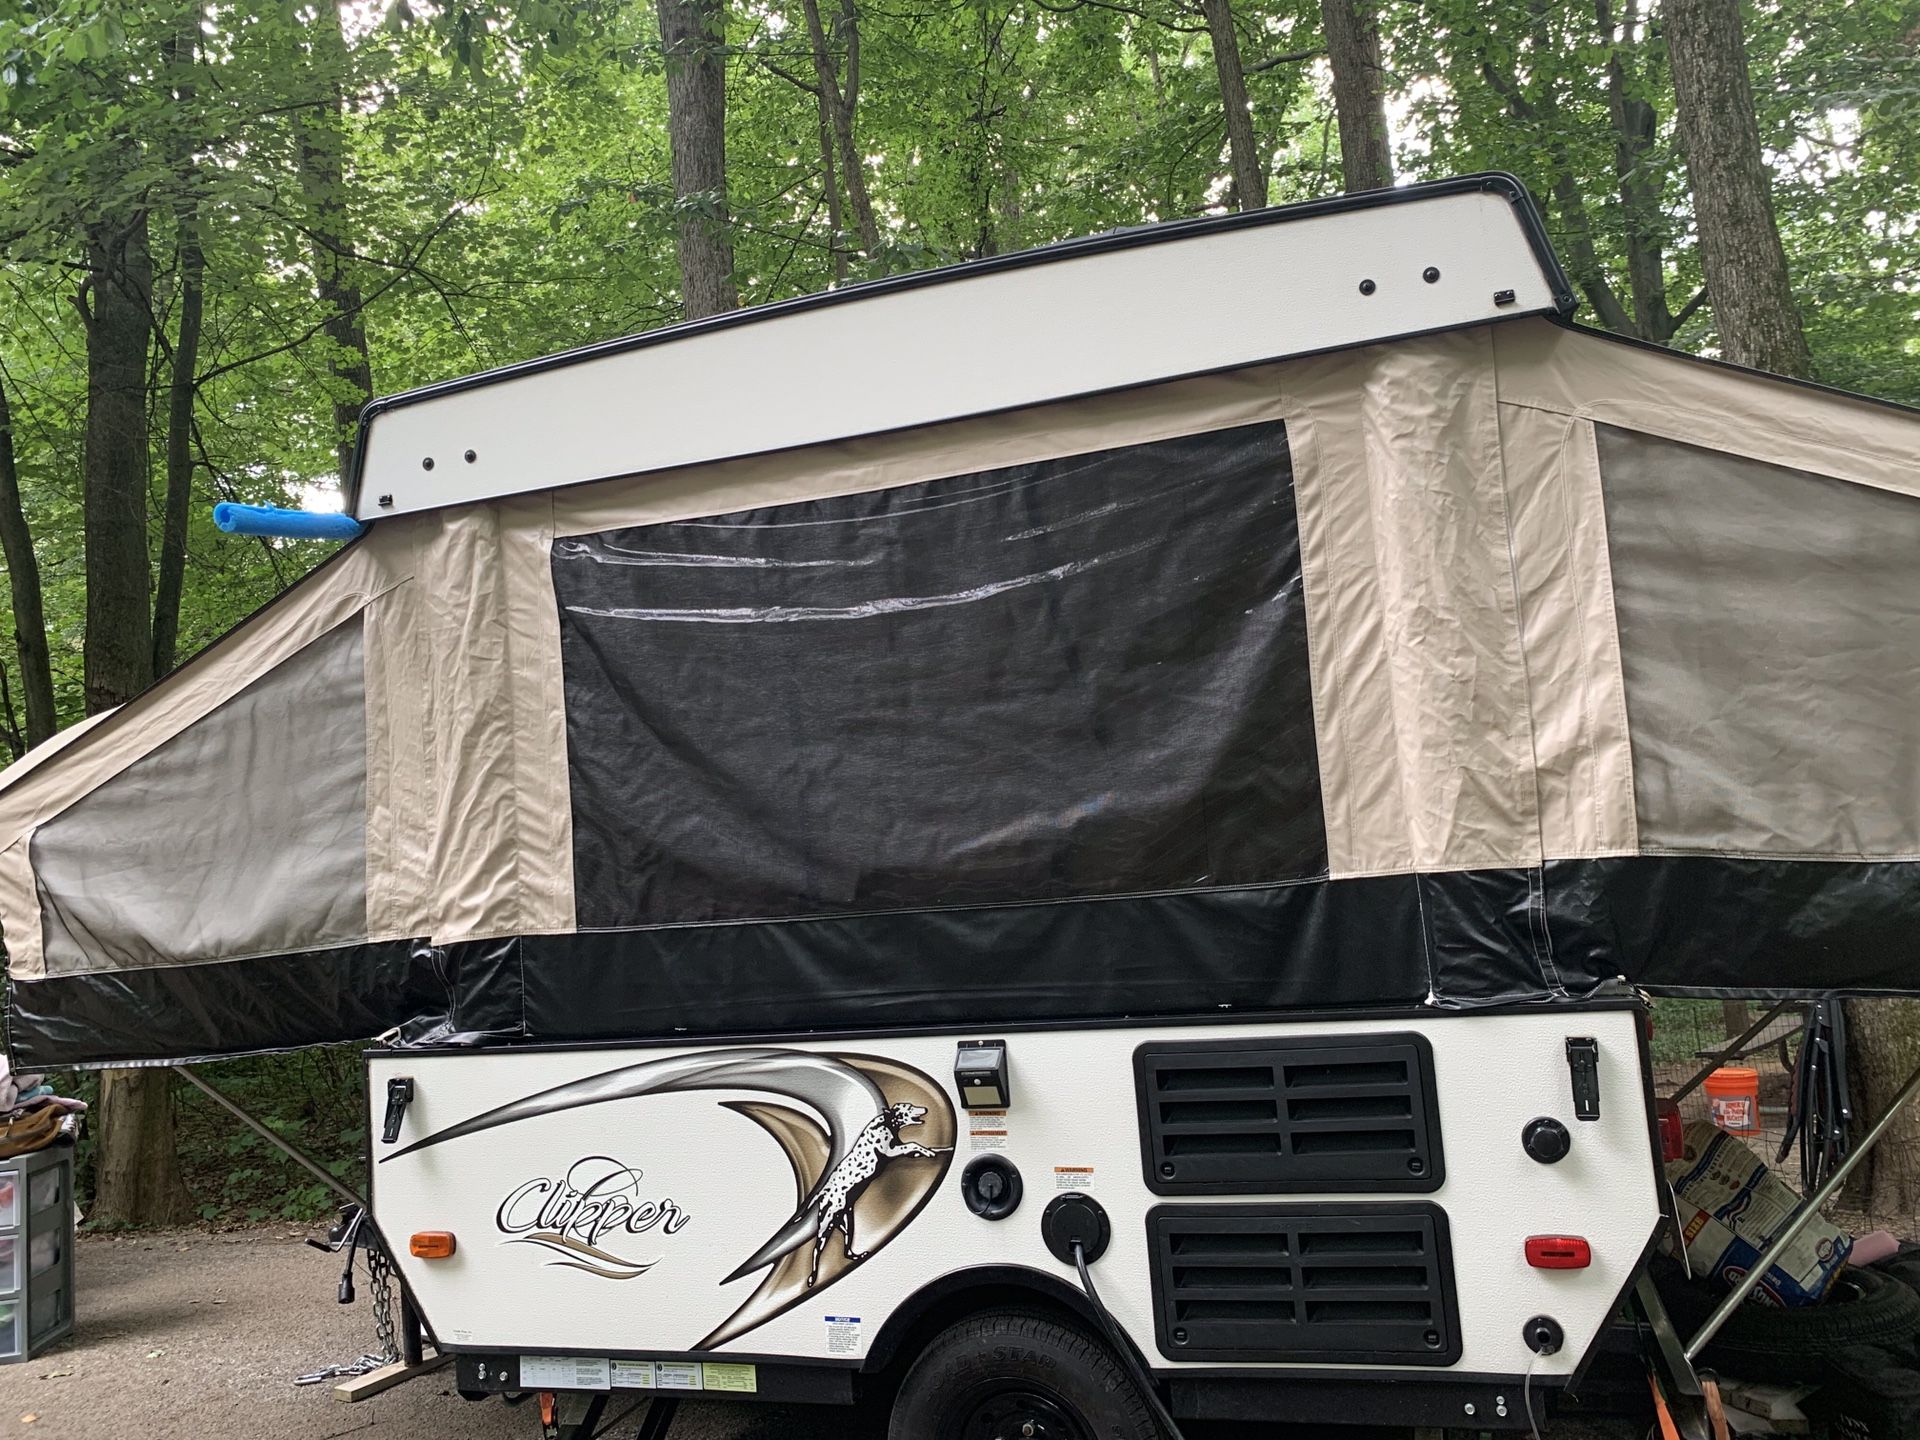 2018 pop up camper Clipper 806LS by forest river